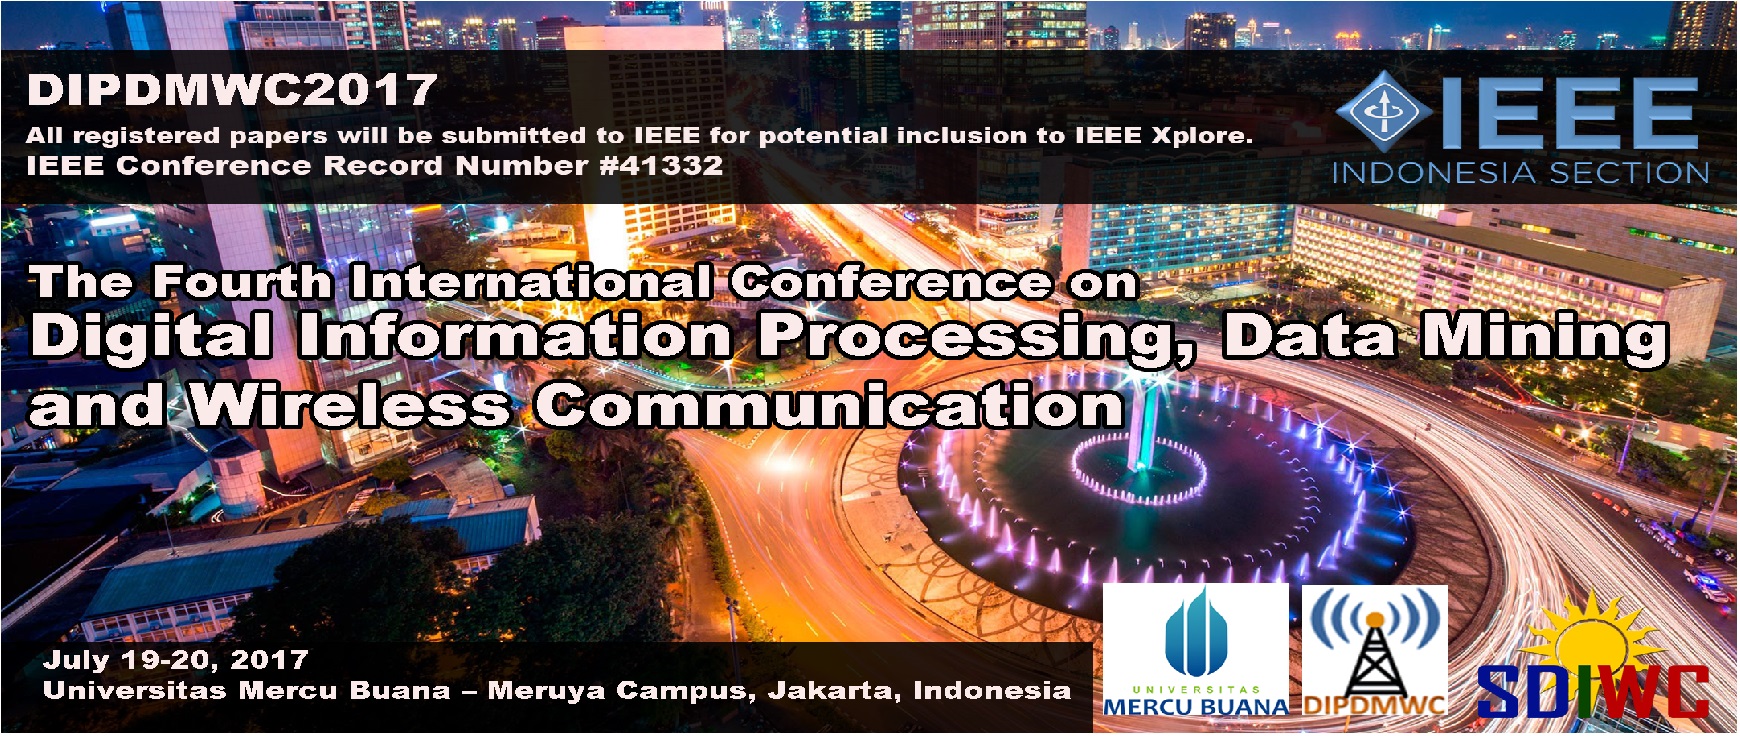 4th Int. Conf. on Digital Information Processing, Data Mining and Wireless Communication